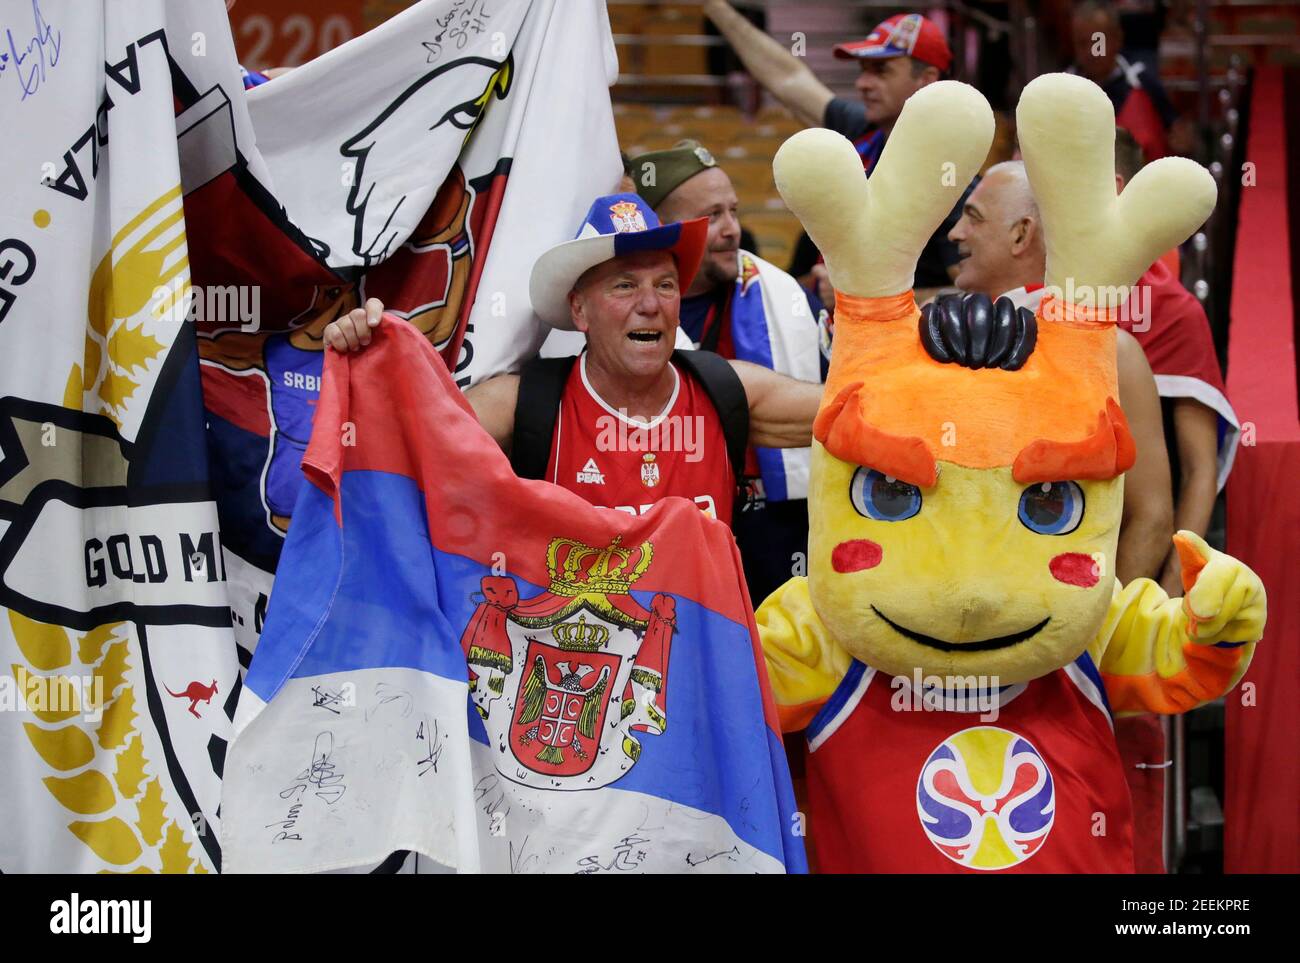 Basketball - FIBA World Cup - Second Round - Group J - Serbia v Puerto Rico - Wuhan Sports Centre, Wuhan, China - September 6, 2019  Serbia fan with the FIBA World Cup mascot before the match REUTERS/Jason Lee Stock Photo